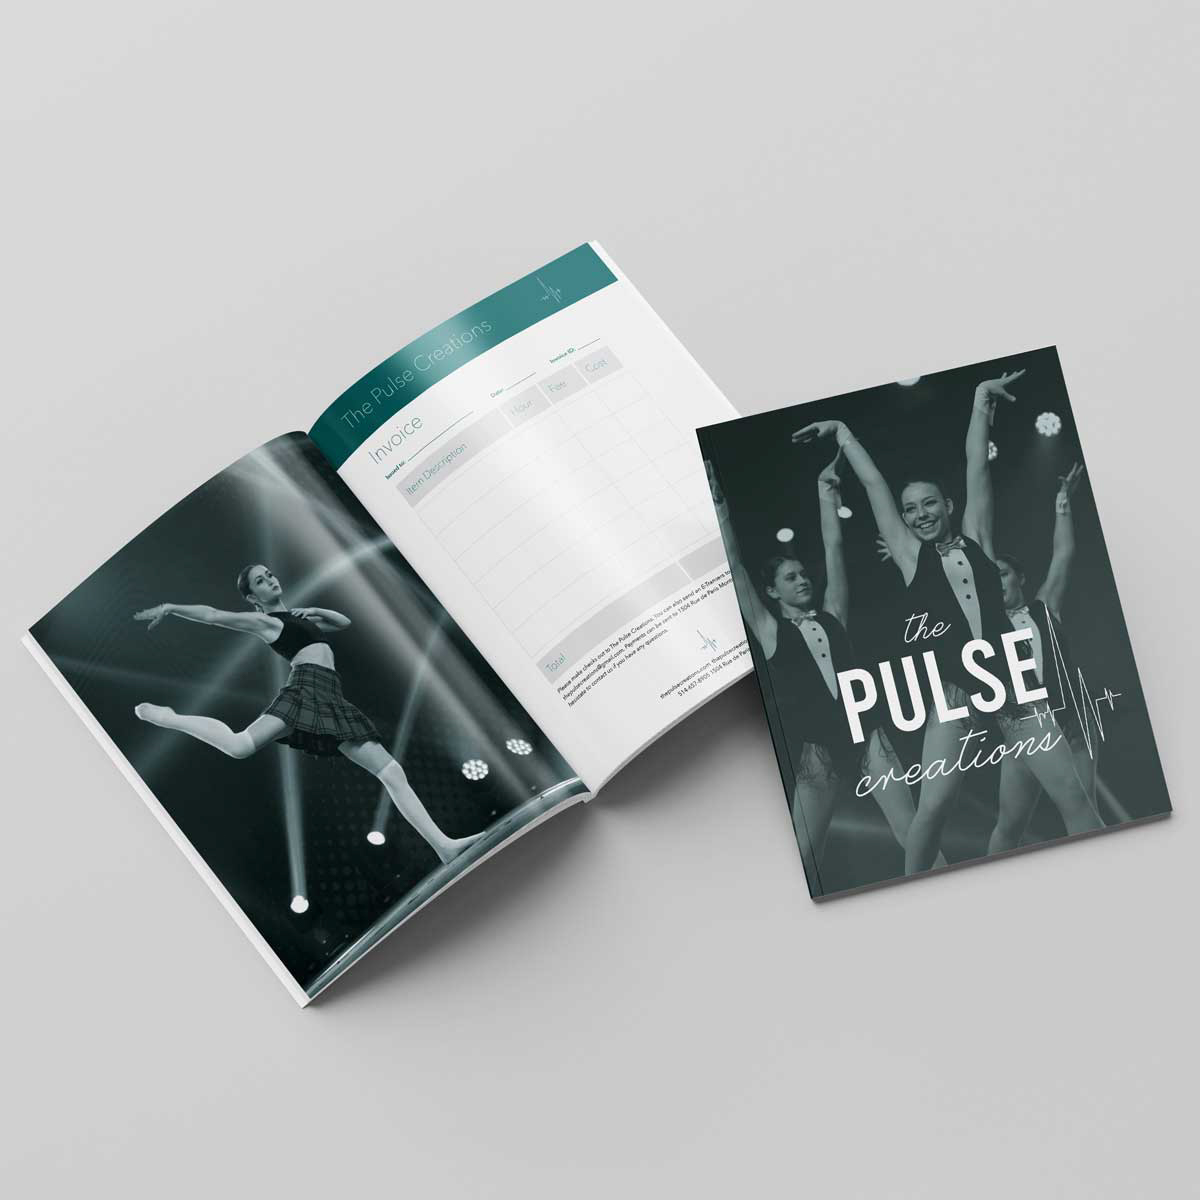 This is a brochure for The Pulse Creations